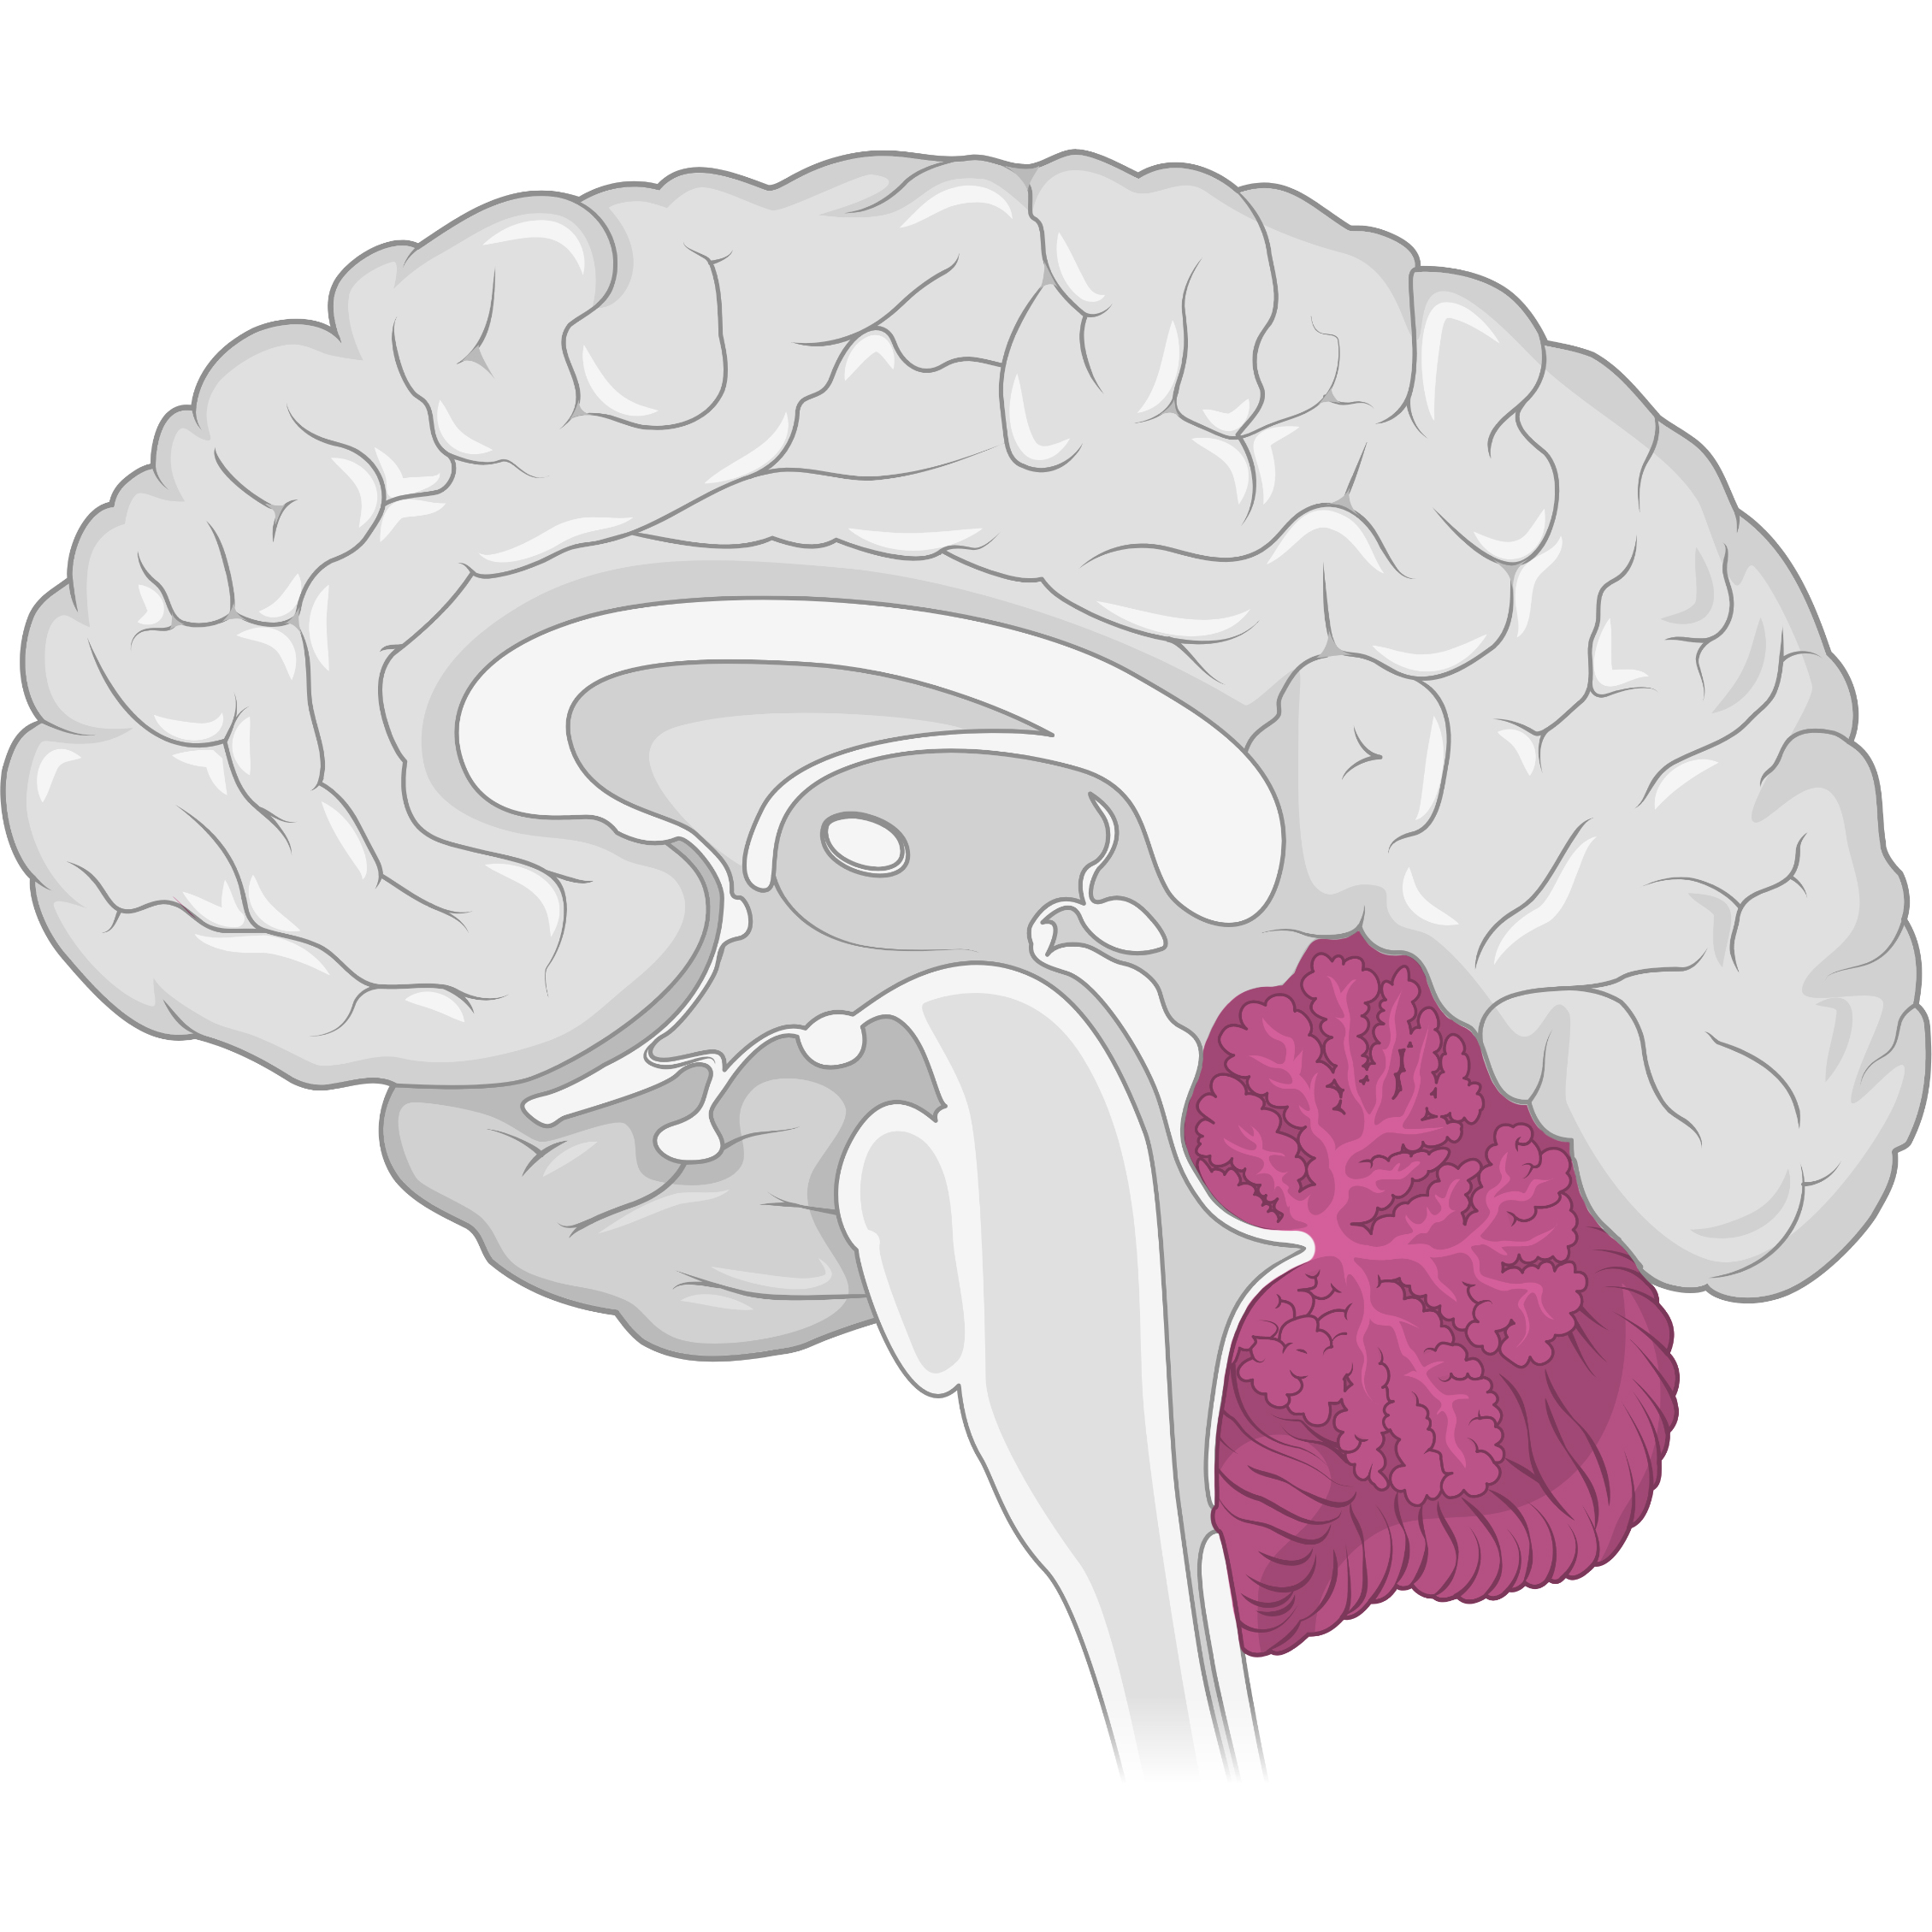 Grey brain (sagittal cut) with the cerebellum highlighted in pink.